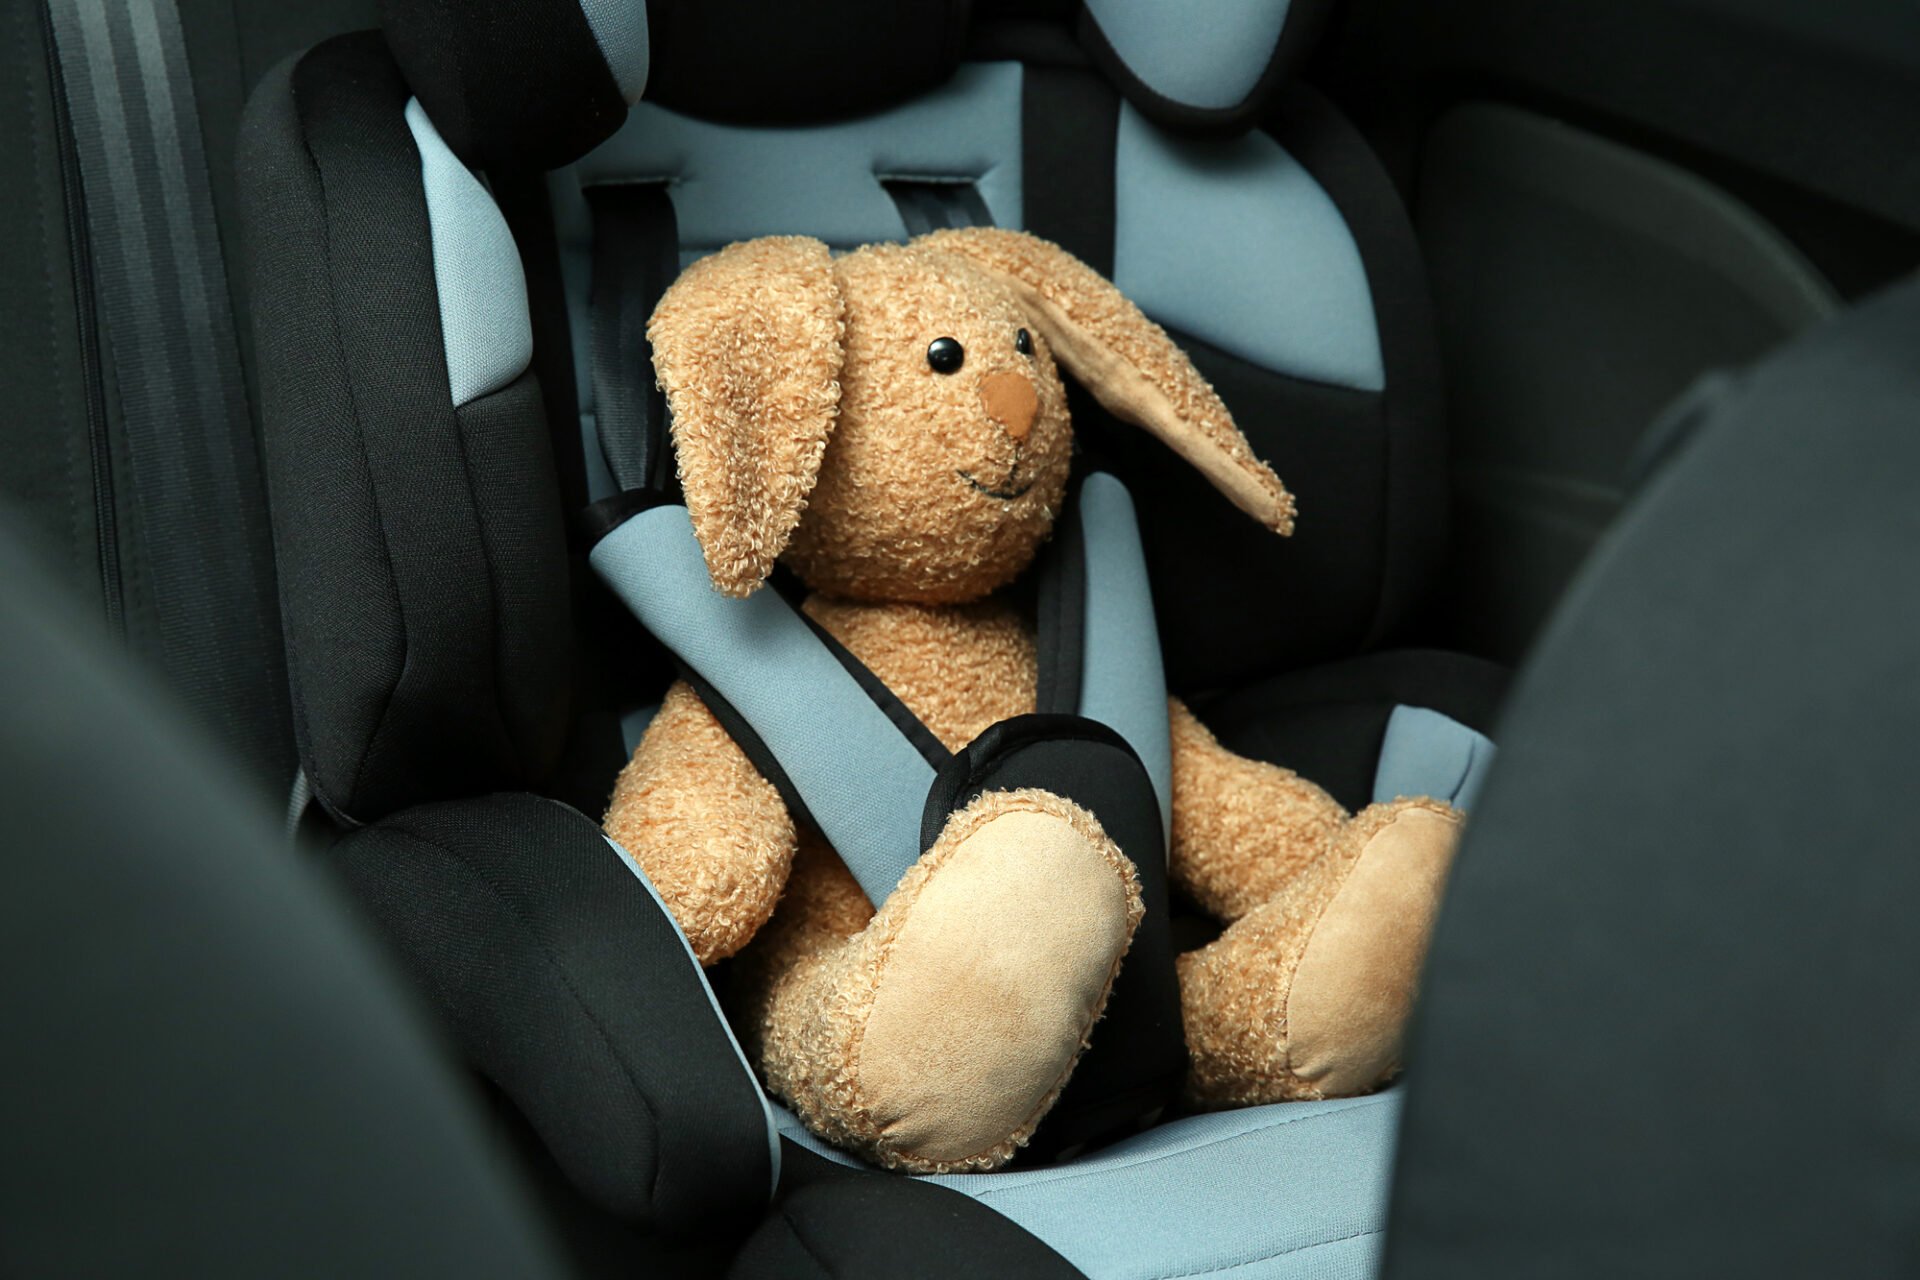 Plush bunny sitting in the child's car seat